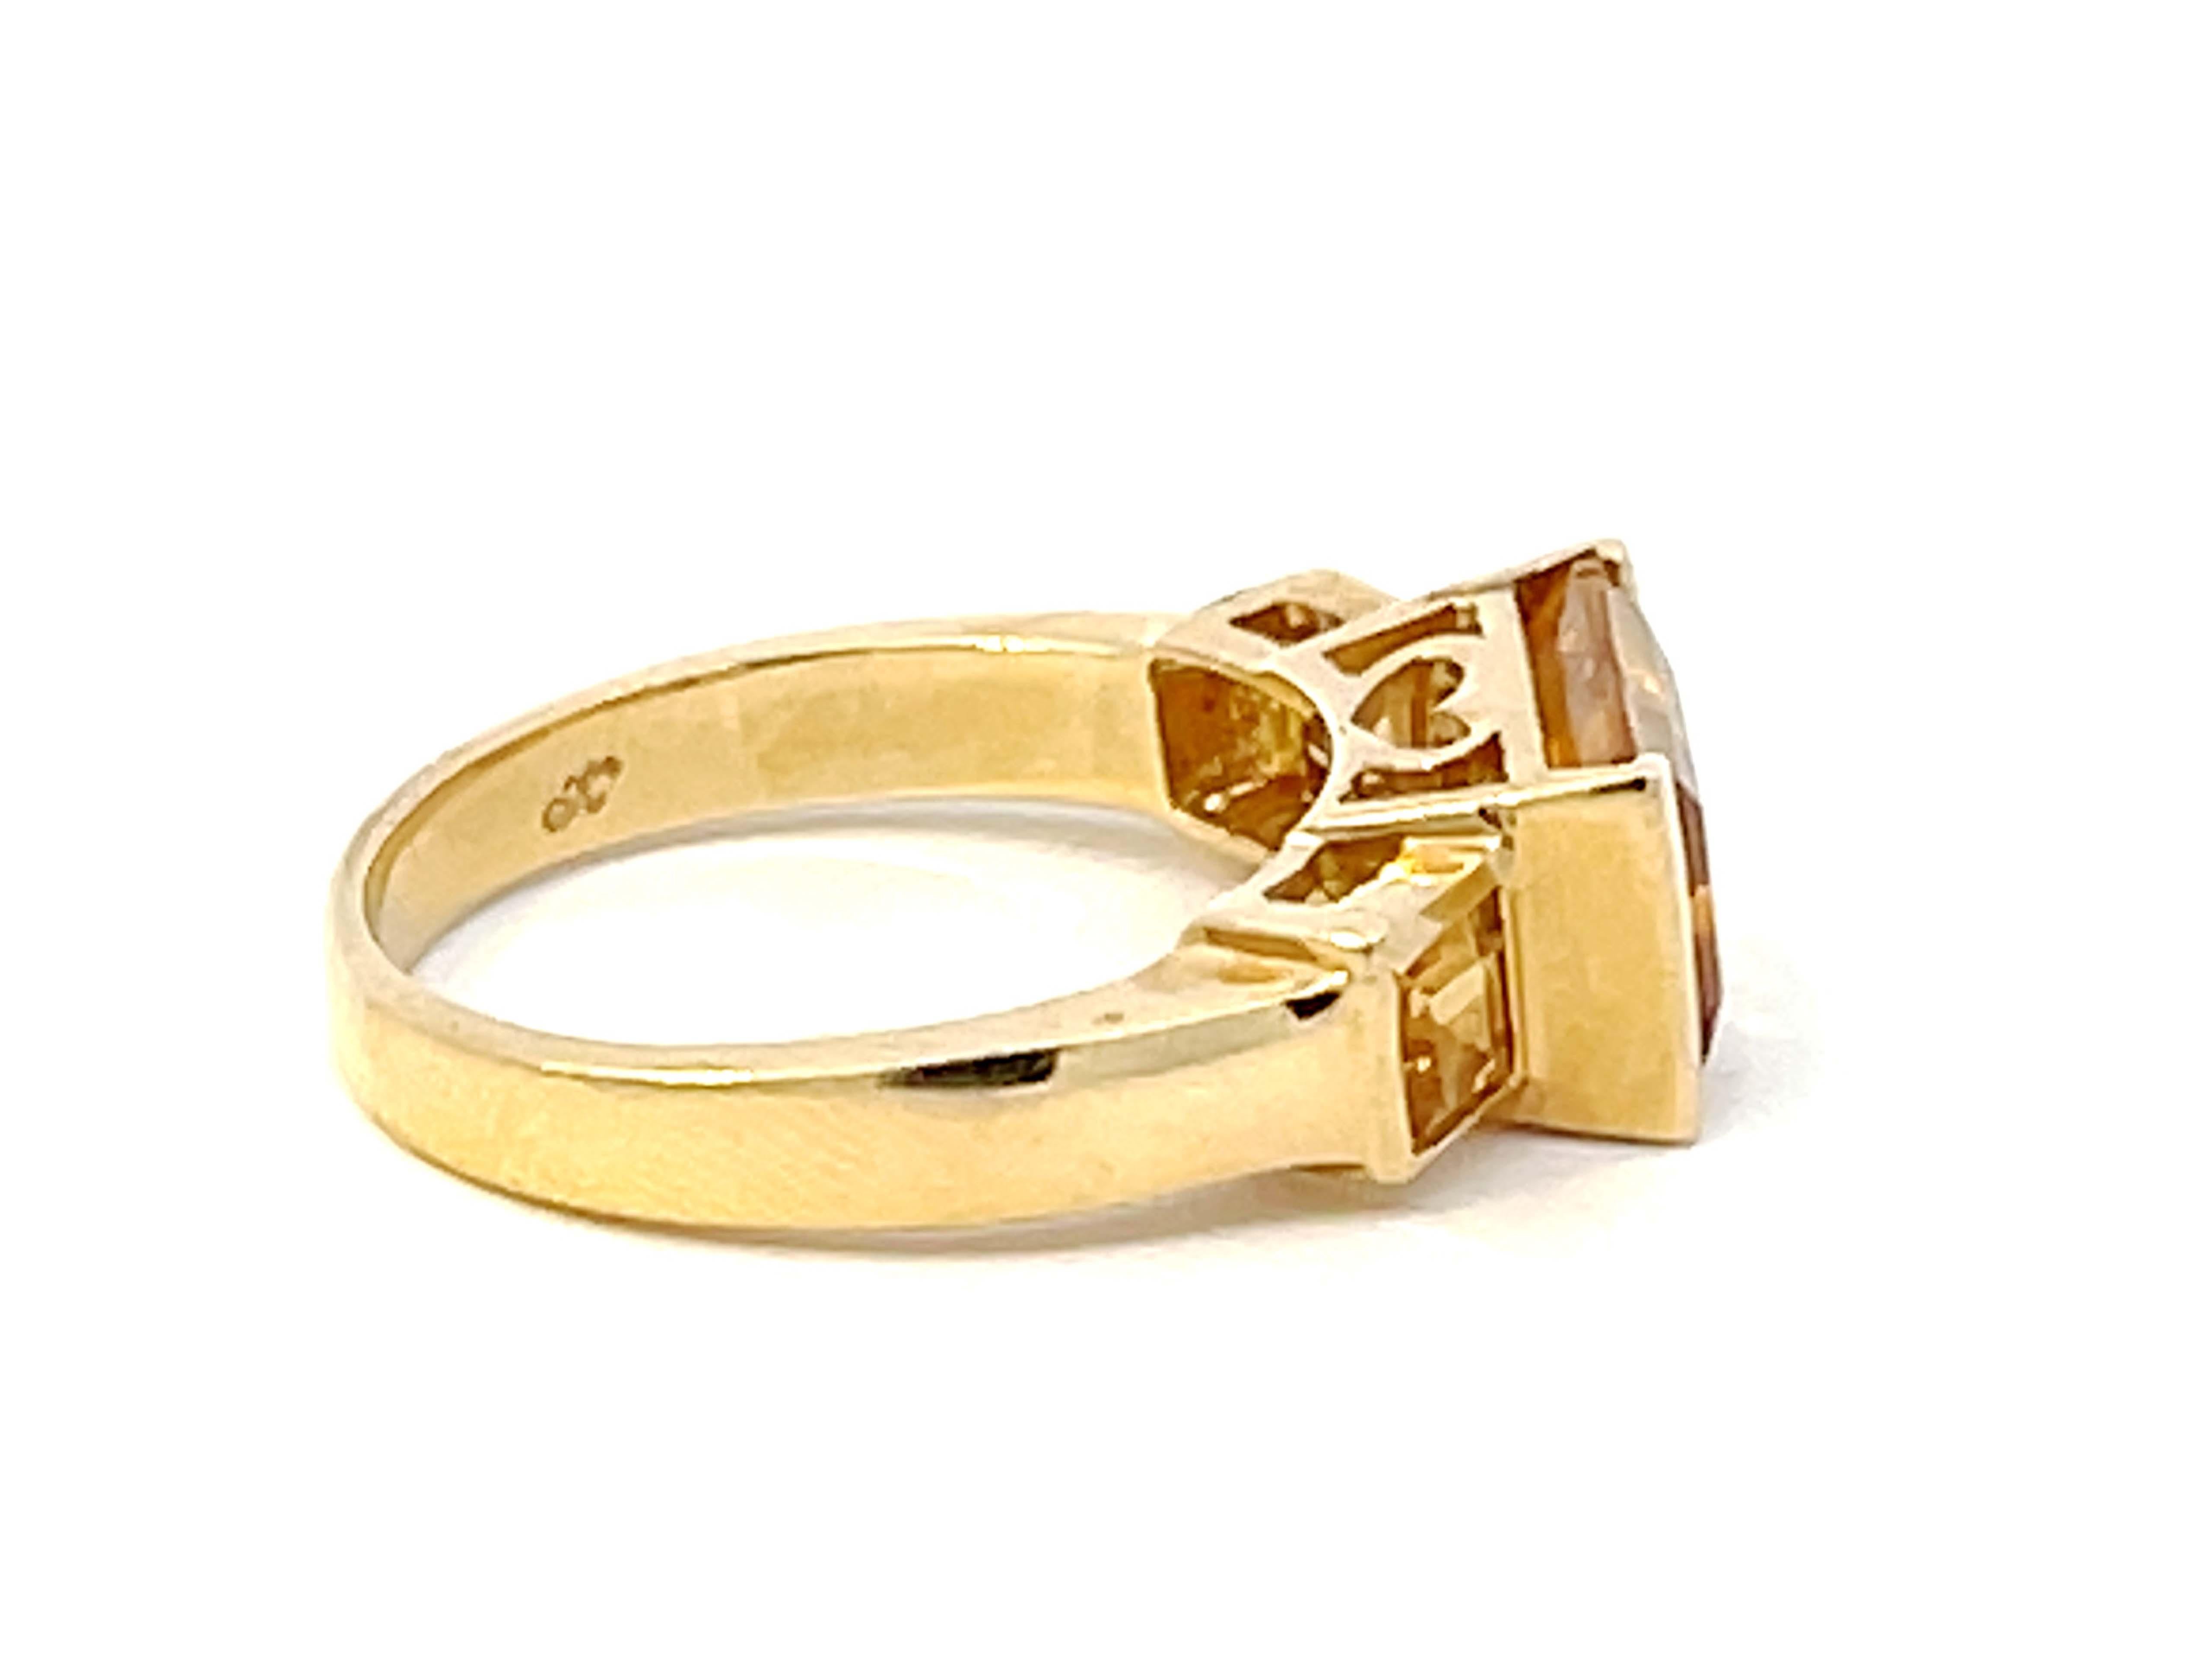 Vintage Triple Citrine Ring in 14k Yellow Gold In Excellent Condition For Sale In Honolulu, HI